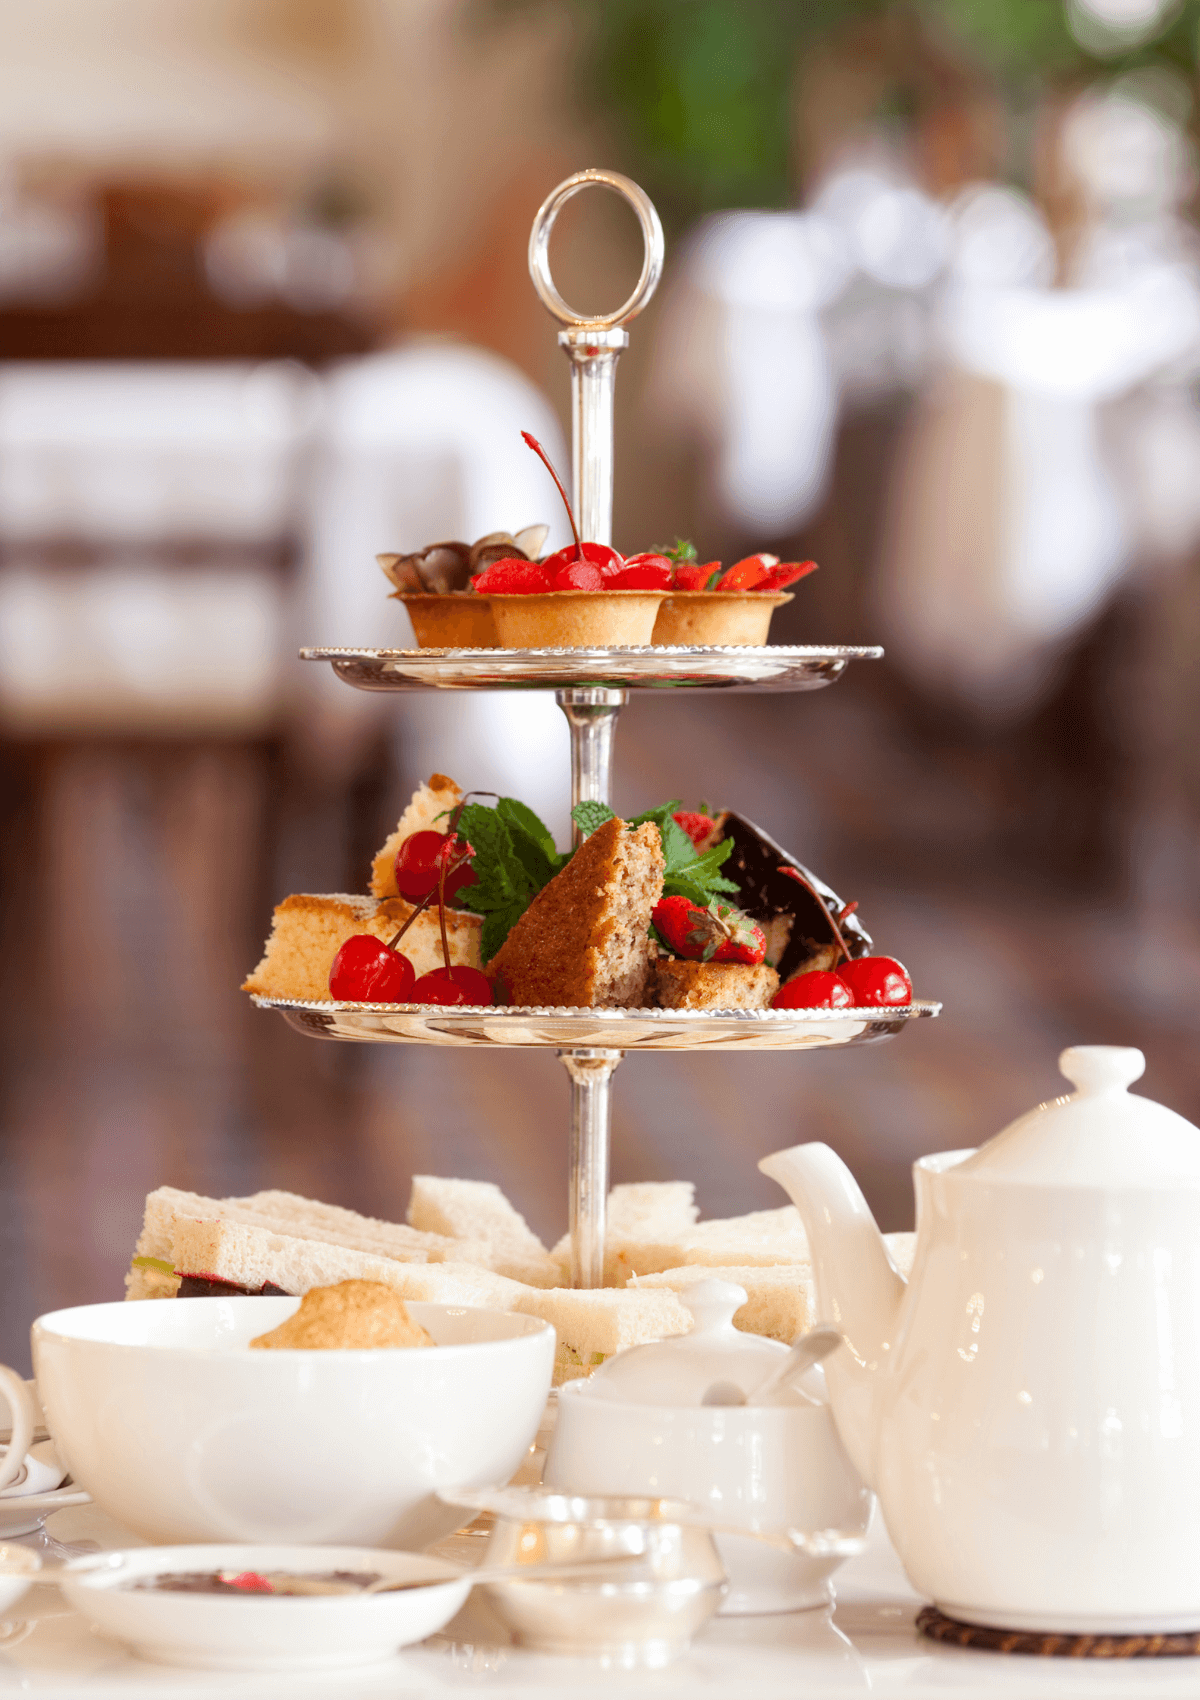 Afternoon tea deals for cheap days out in England